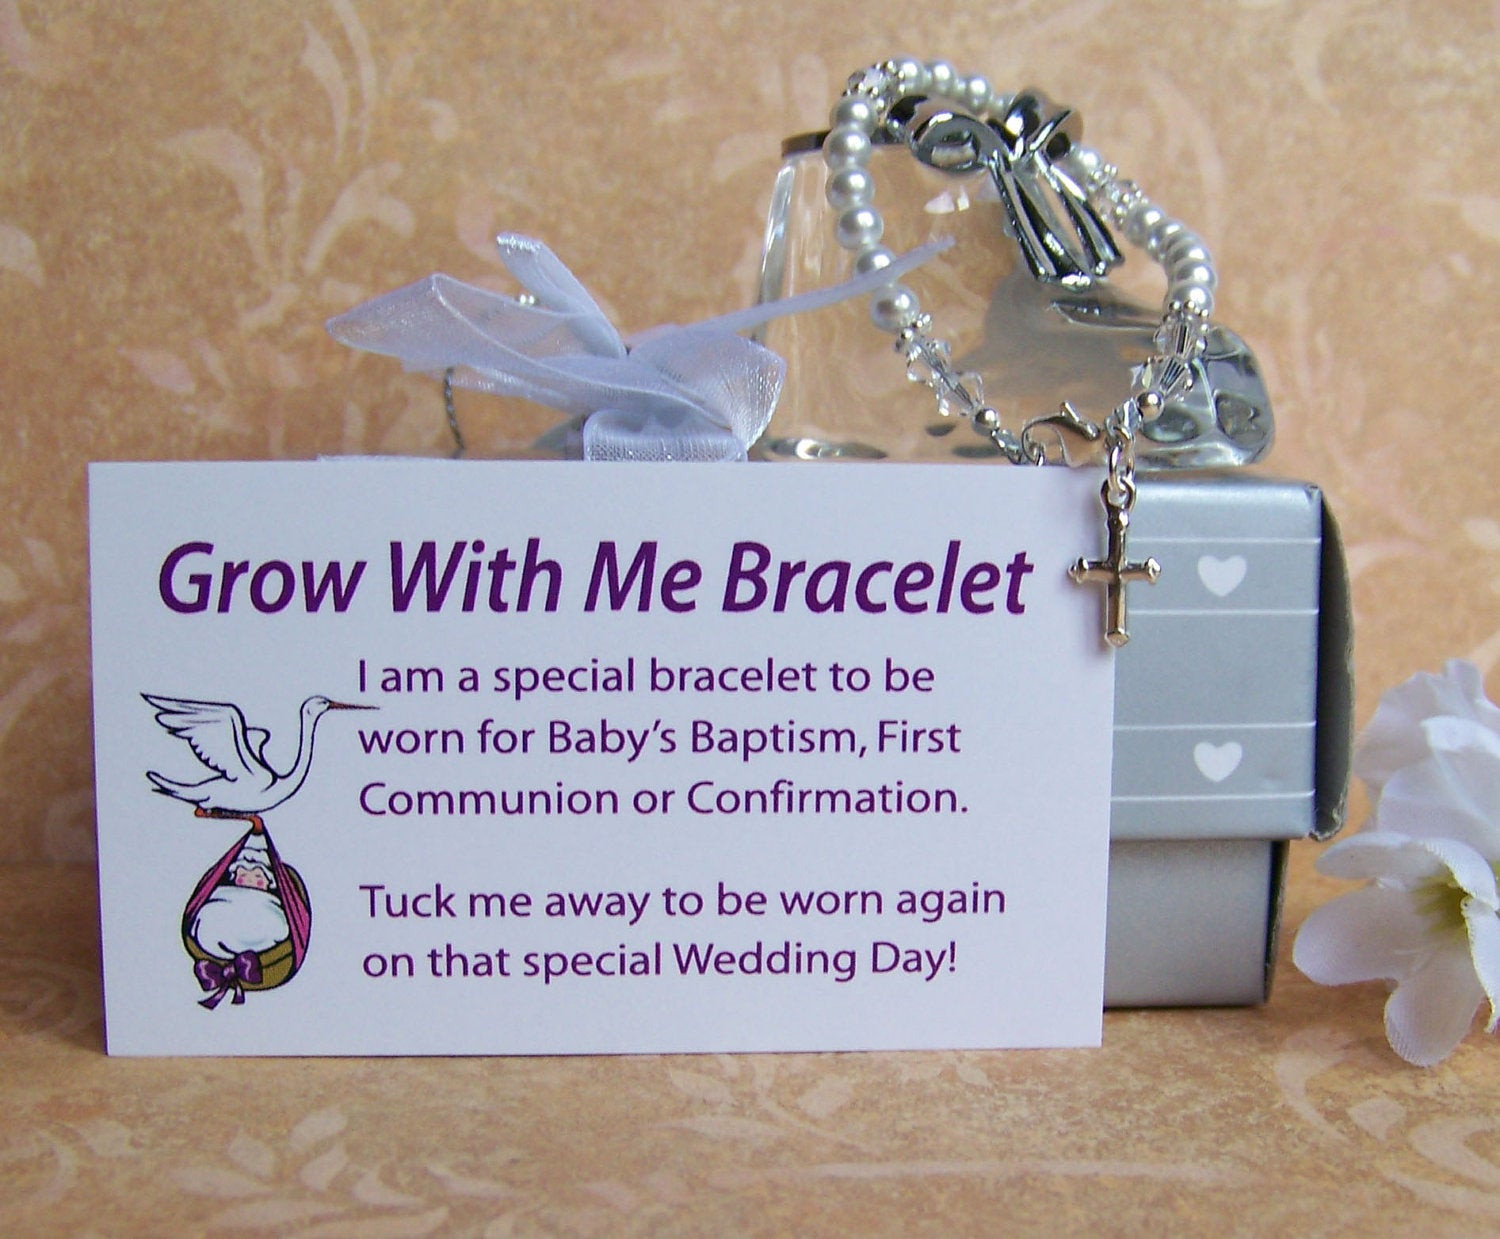 Gift Ideas For Baptism Baby Girl
 Baby Girl Baptism Bracelet Grow With Me by luckycharm5286